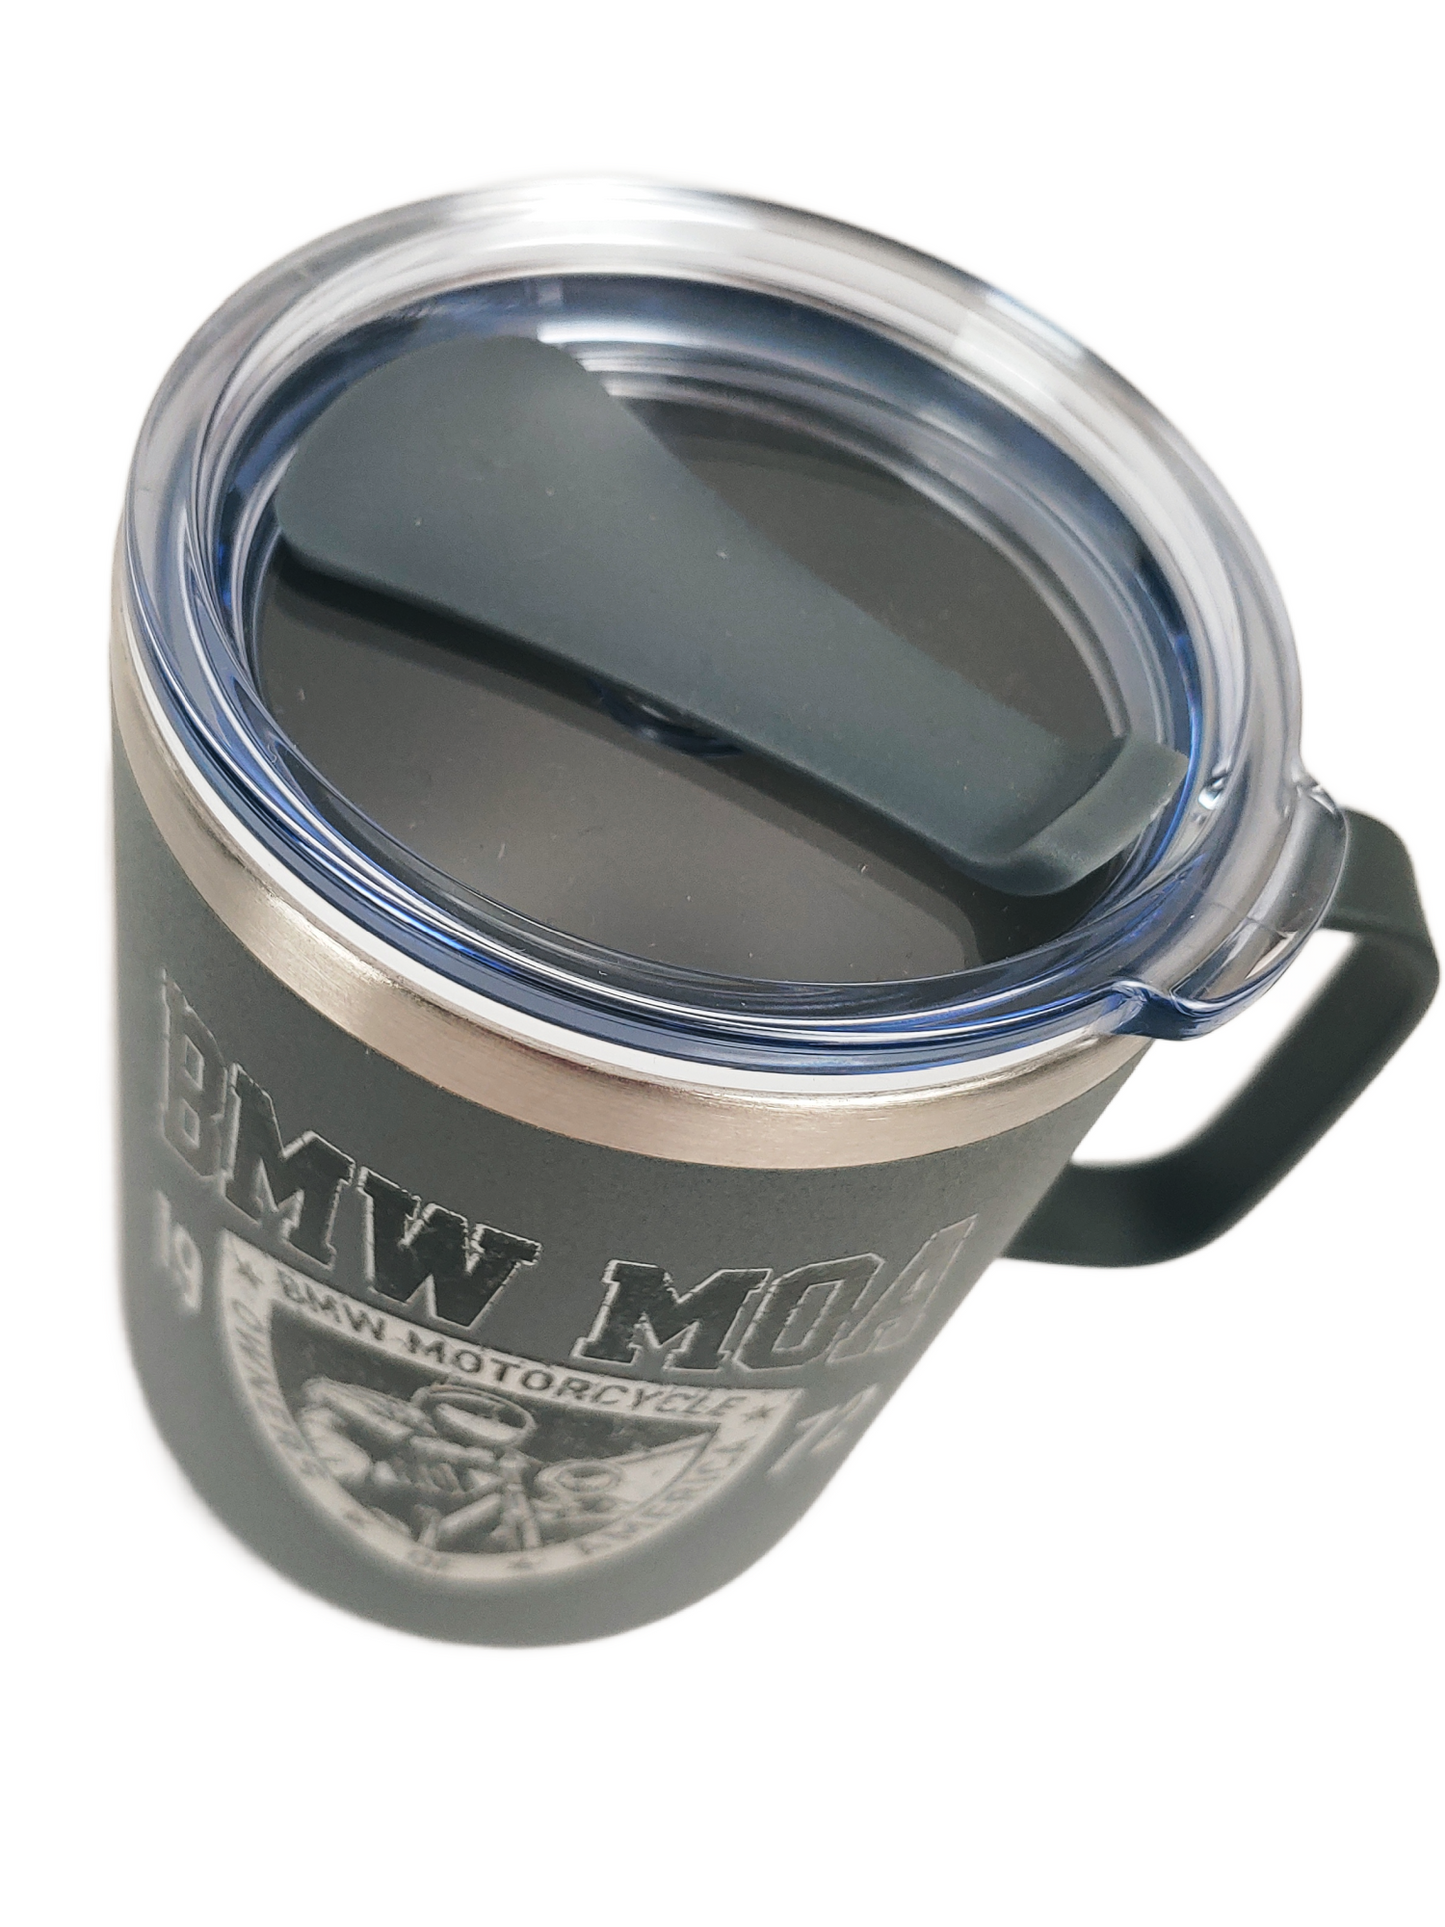 BMW MOA - Stainless Steel Insulated Mug With Handle